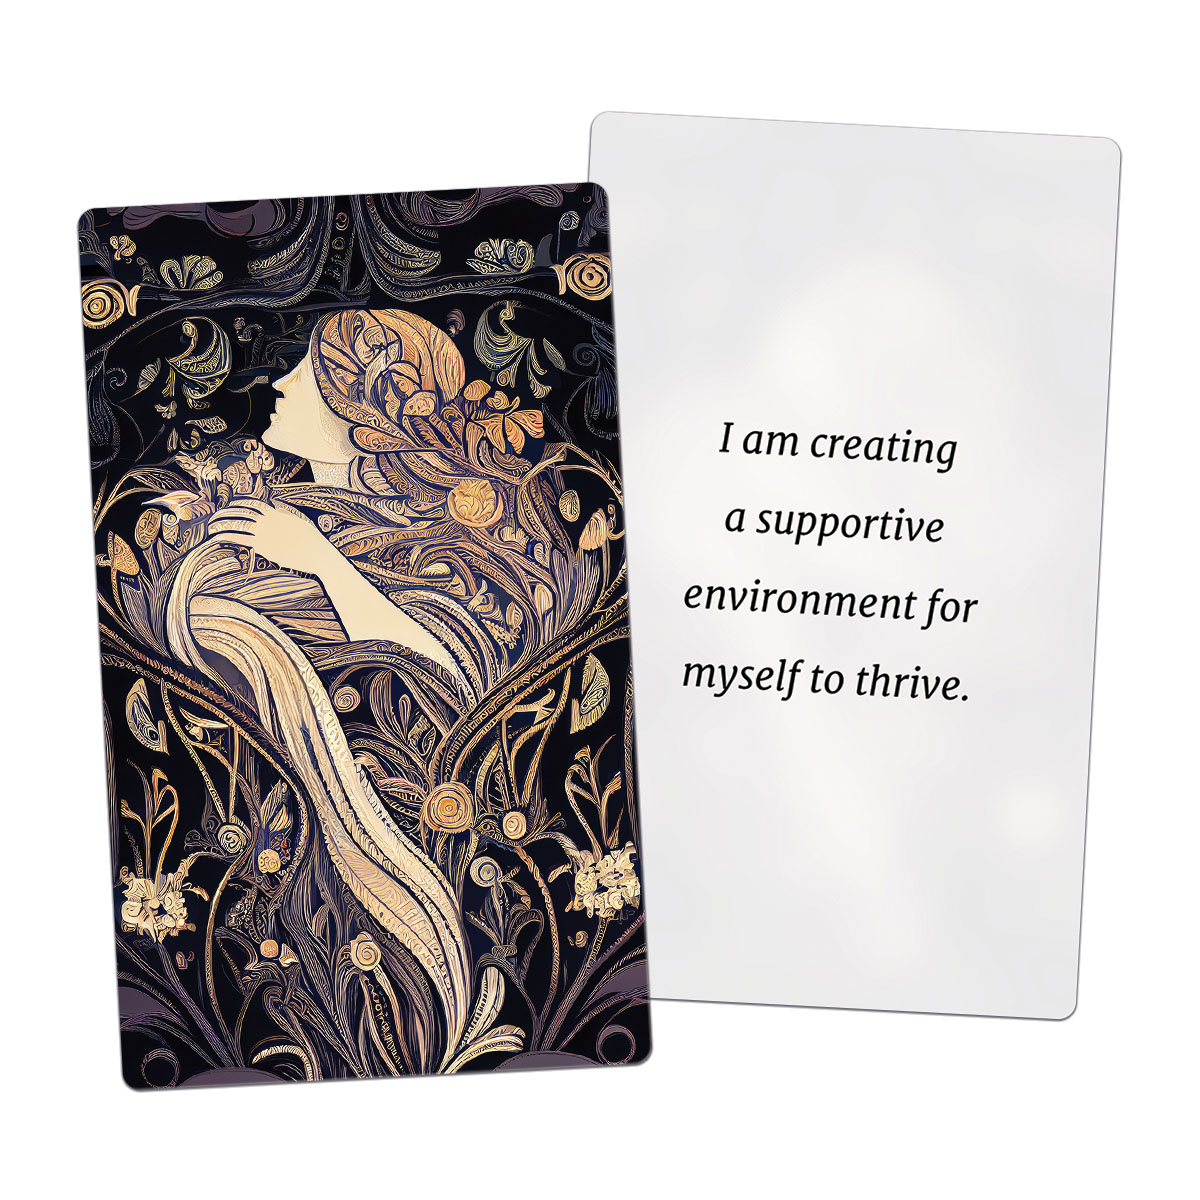 AFFIRMATION CARD: I am creating a supportive environment for myself to thrive